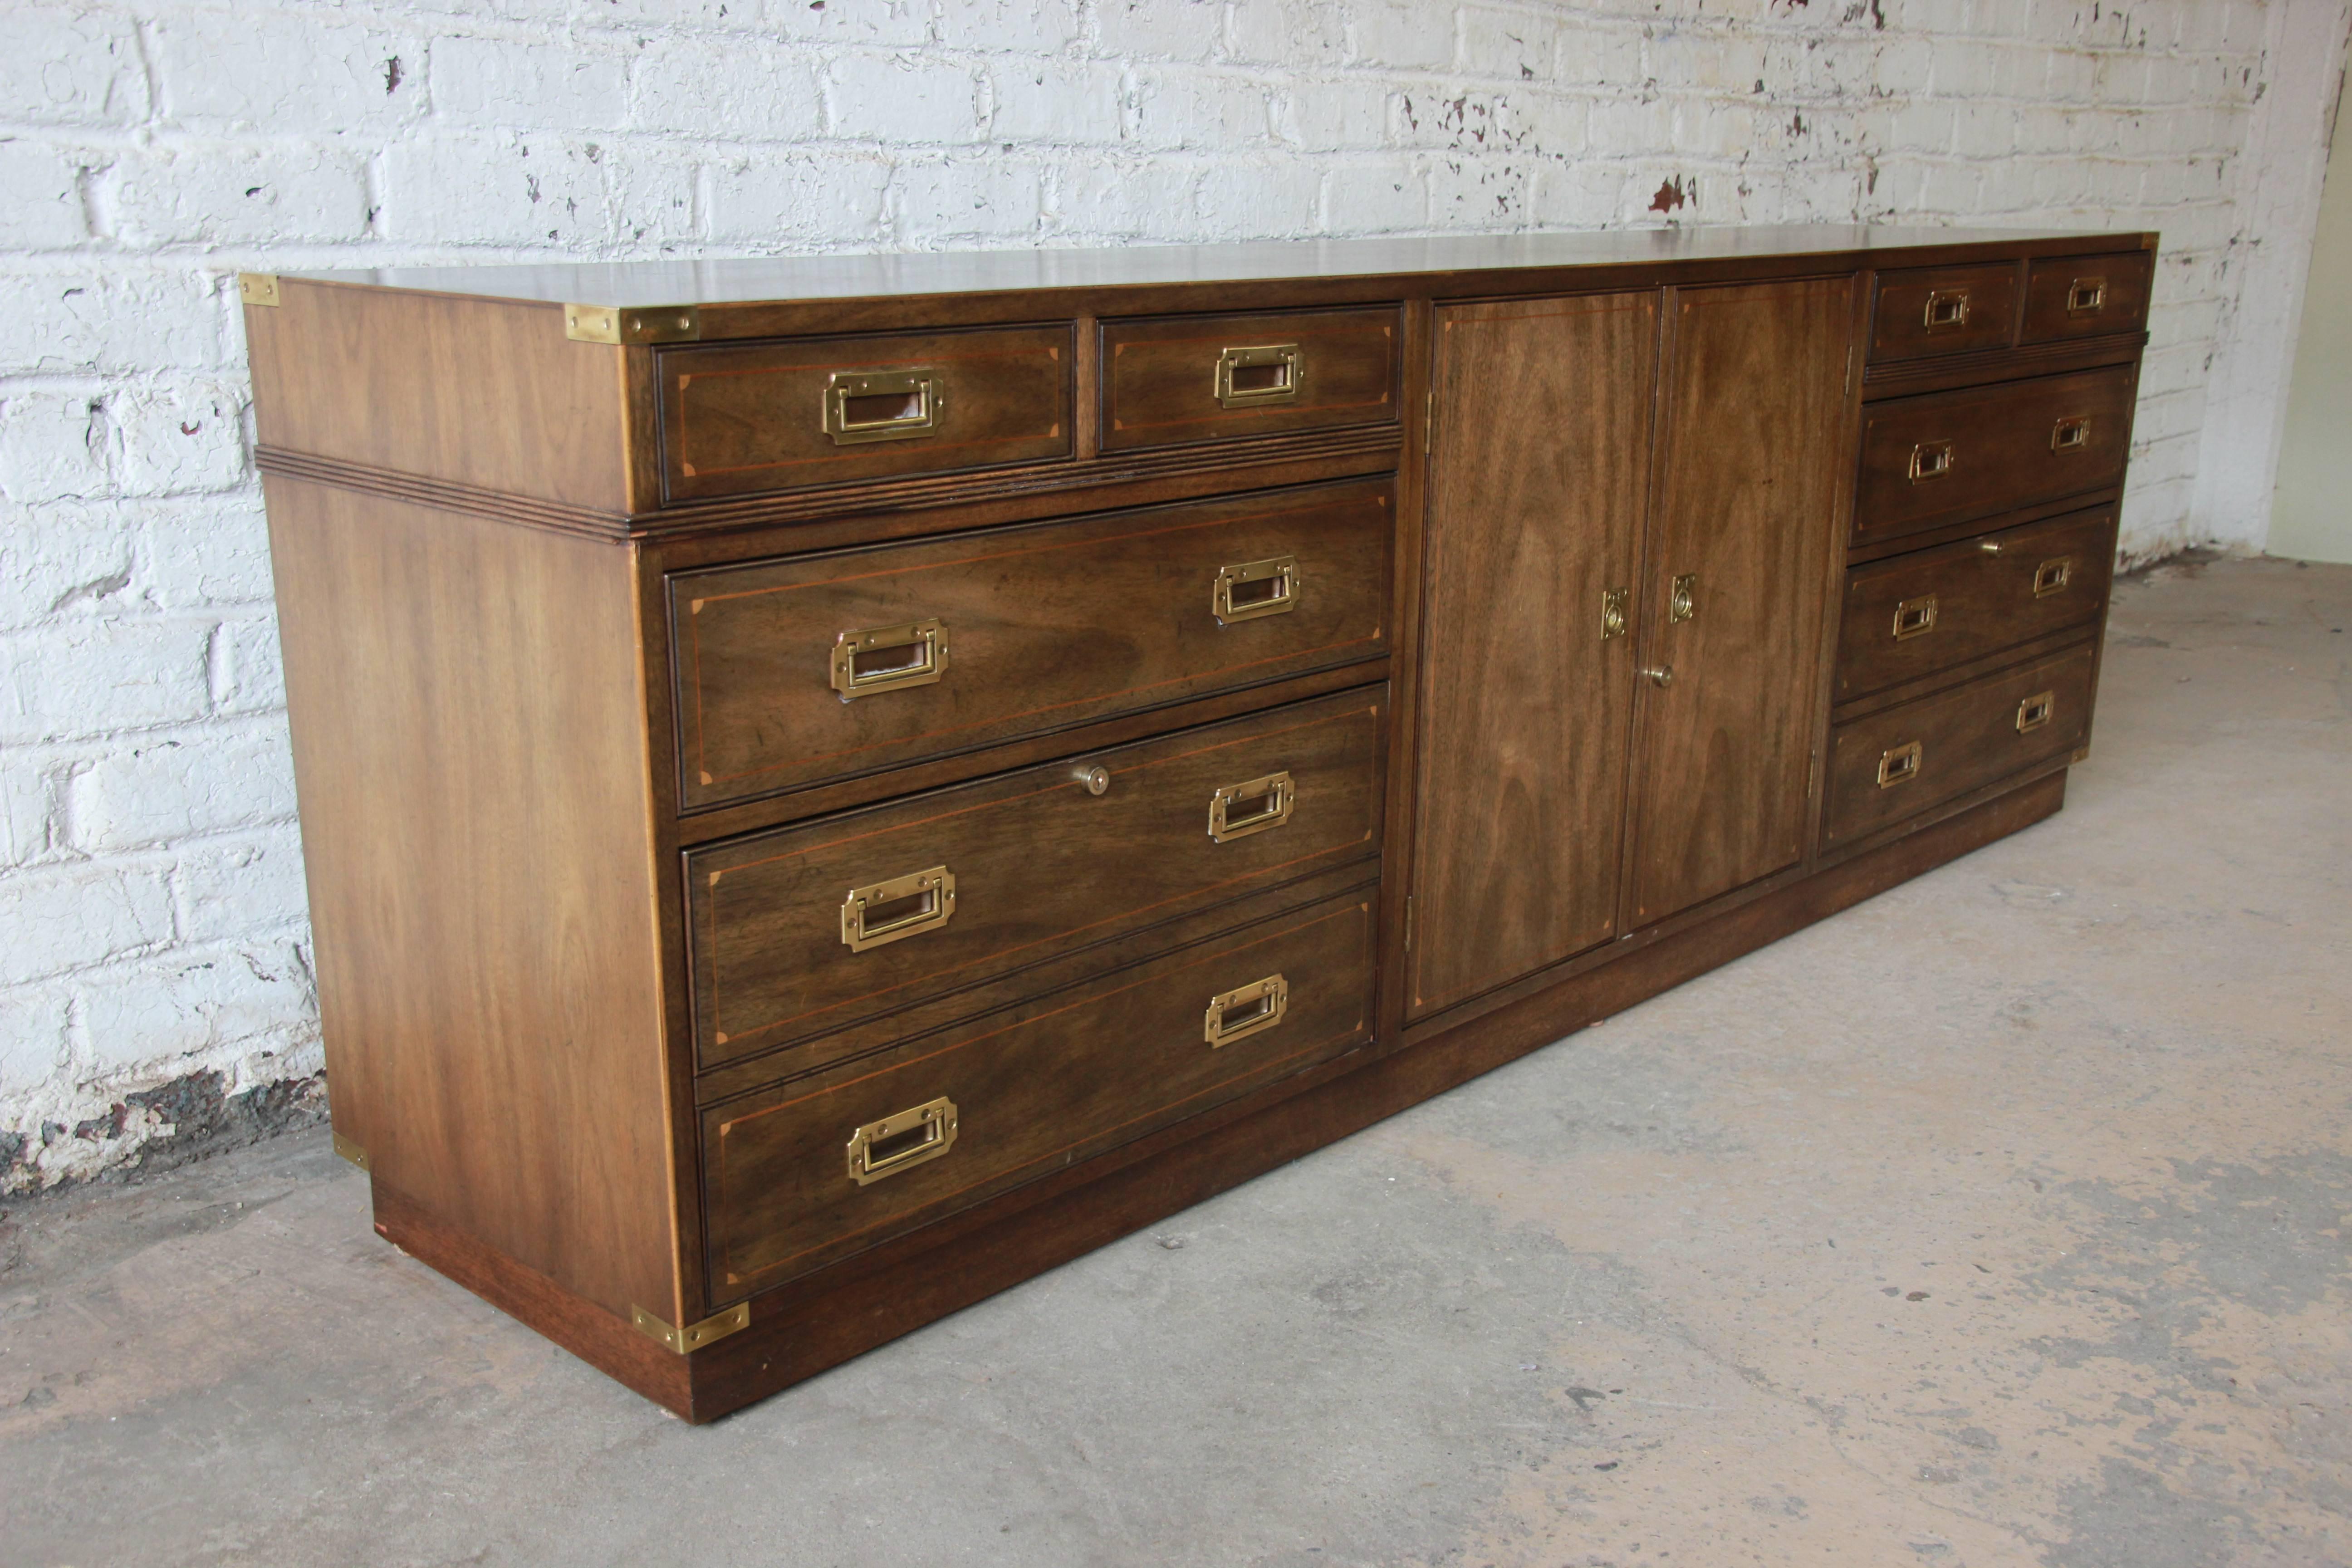 Stunning vintage Kittinger campaign credenza. The credenza has brass hardware with inlaid details. It features eight drawers, two with locking double hanging file organizers. The centre cabinet opens up to an adjustable shelf that locks along with